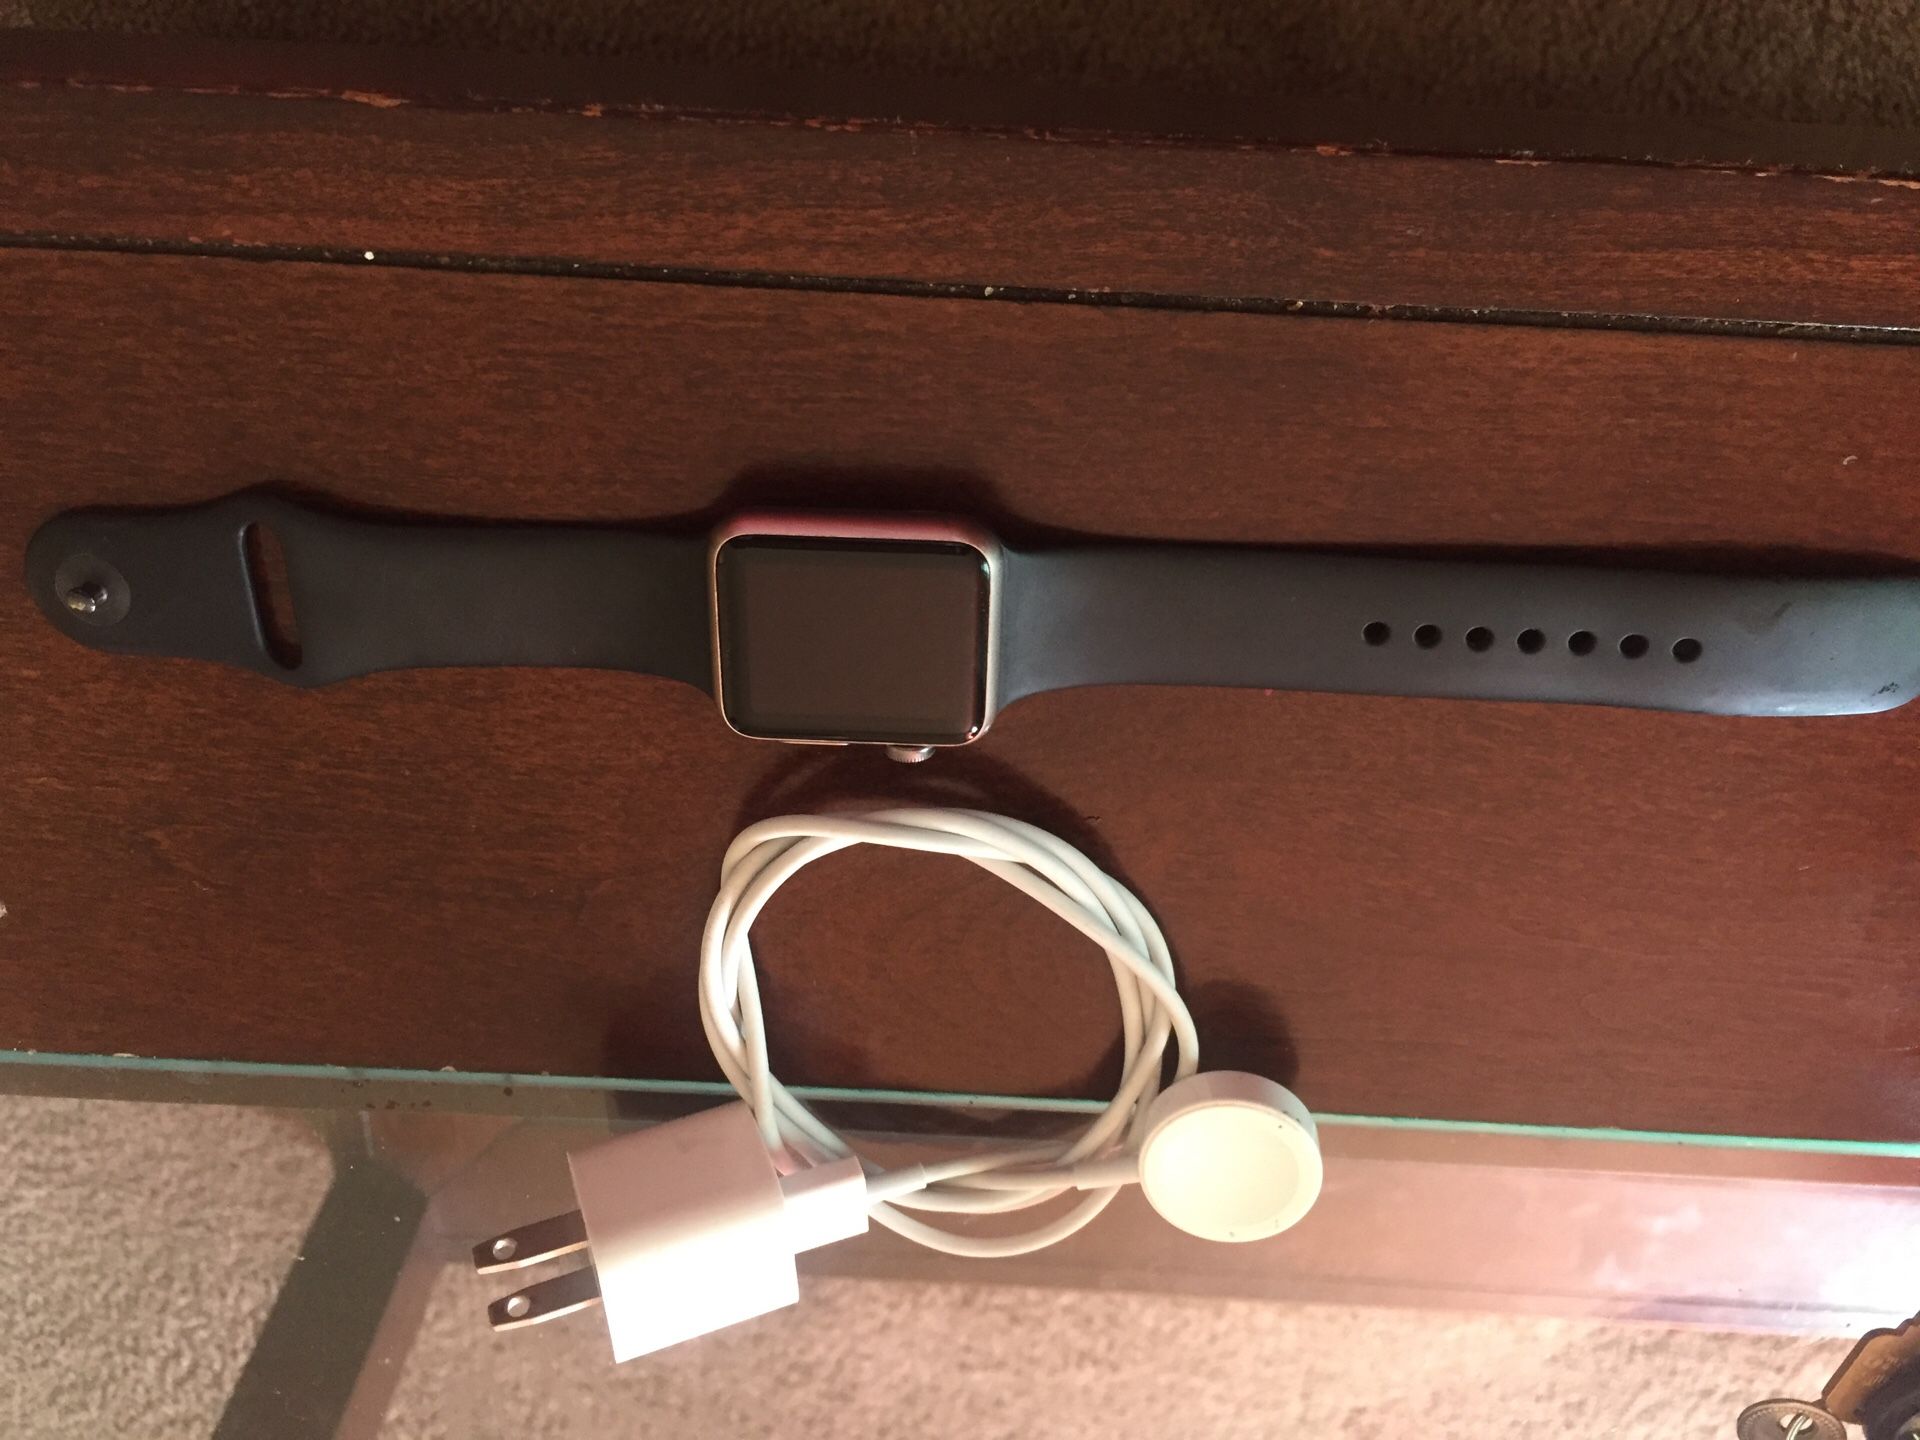 Apple Watch ⌚️ series 2 for sale.